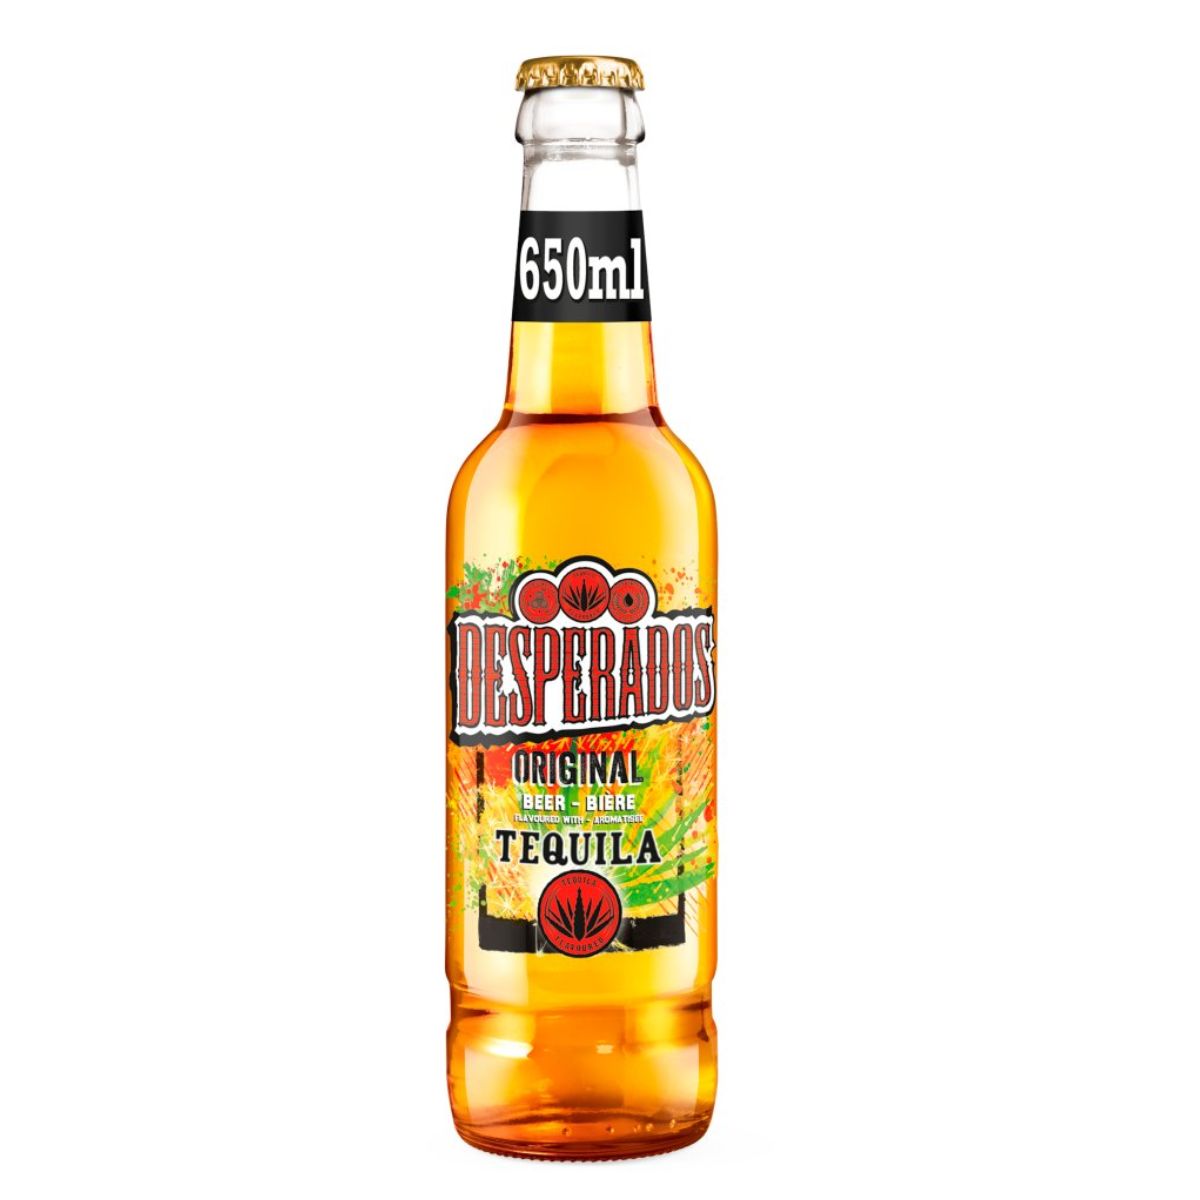 A bottle of Desperados - Tequila Flavoured Lager Beer Bottle (5.9% ABV) - 650ml on a white background.